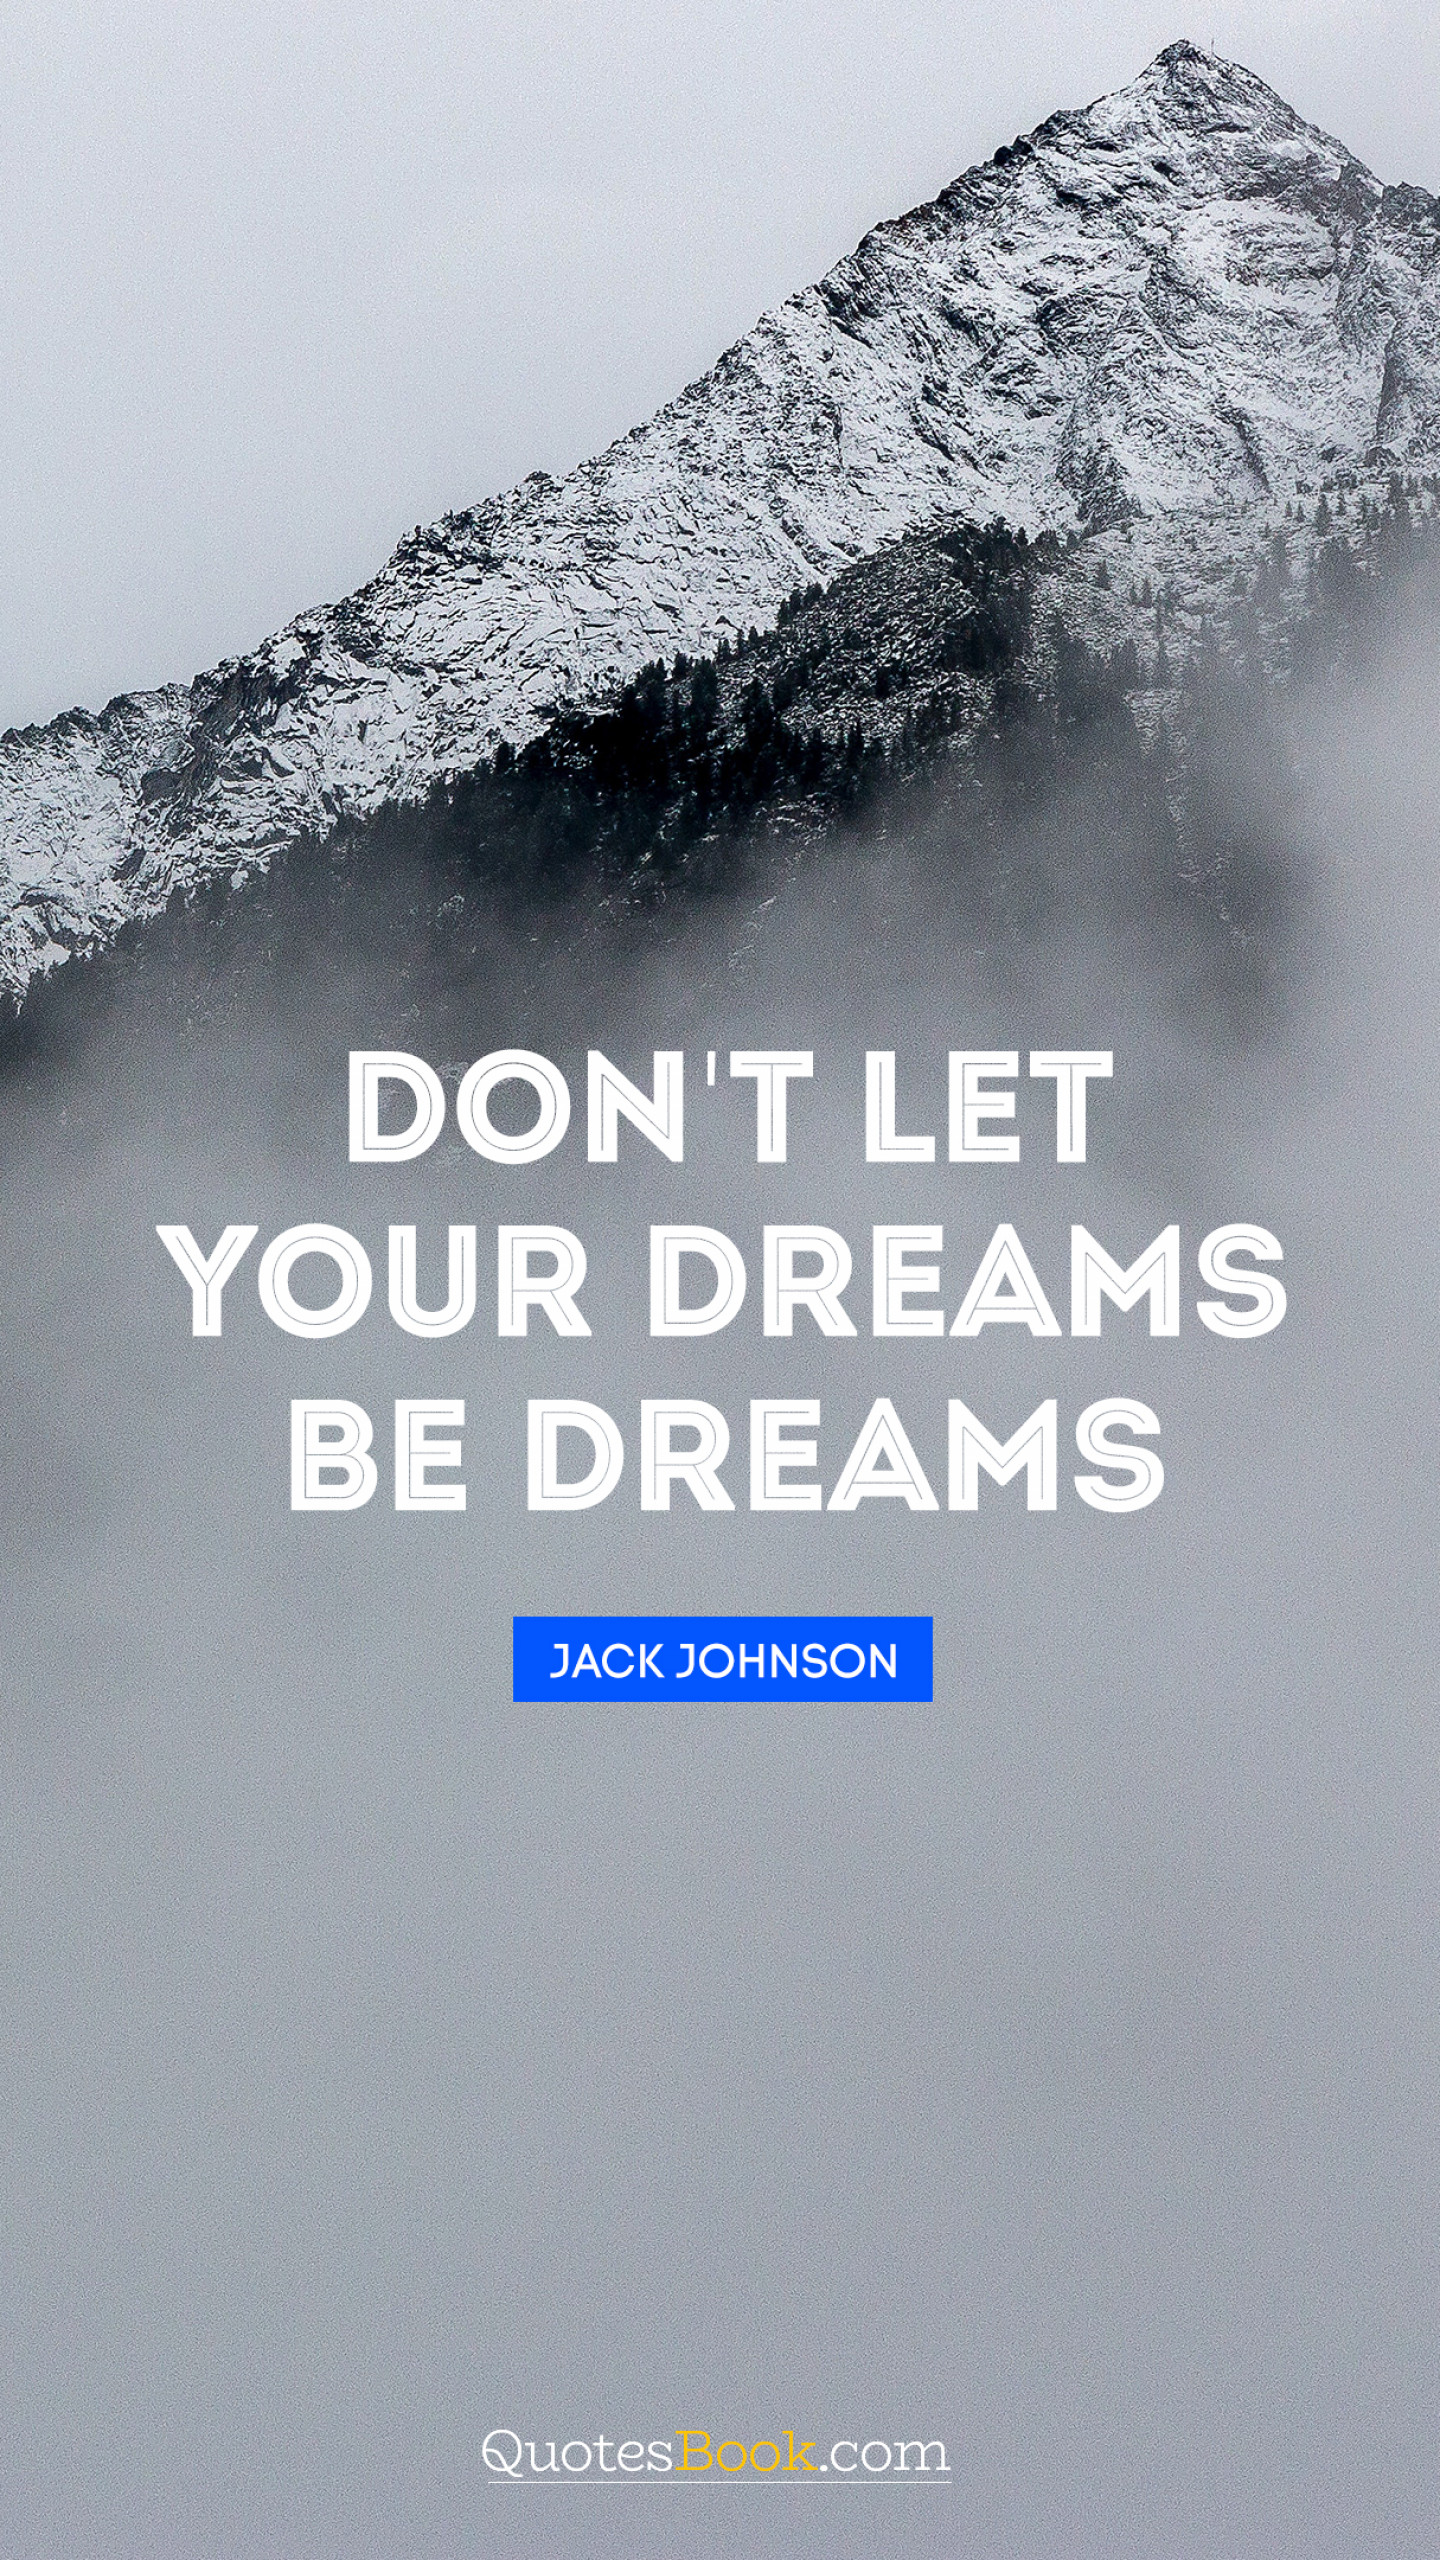 Don't let your dreams be dreams. - Quote by Jack Johnson - QuotesBook